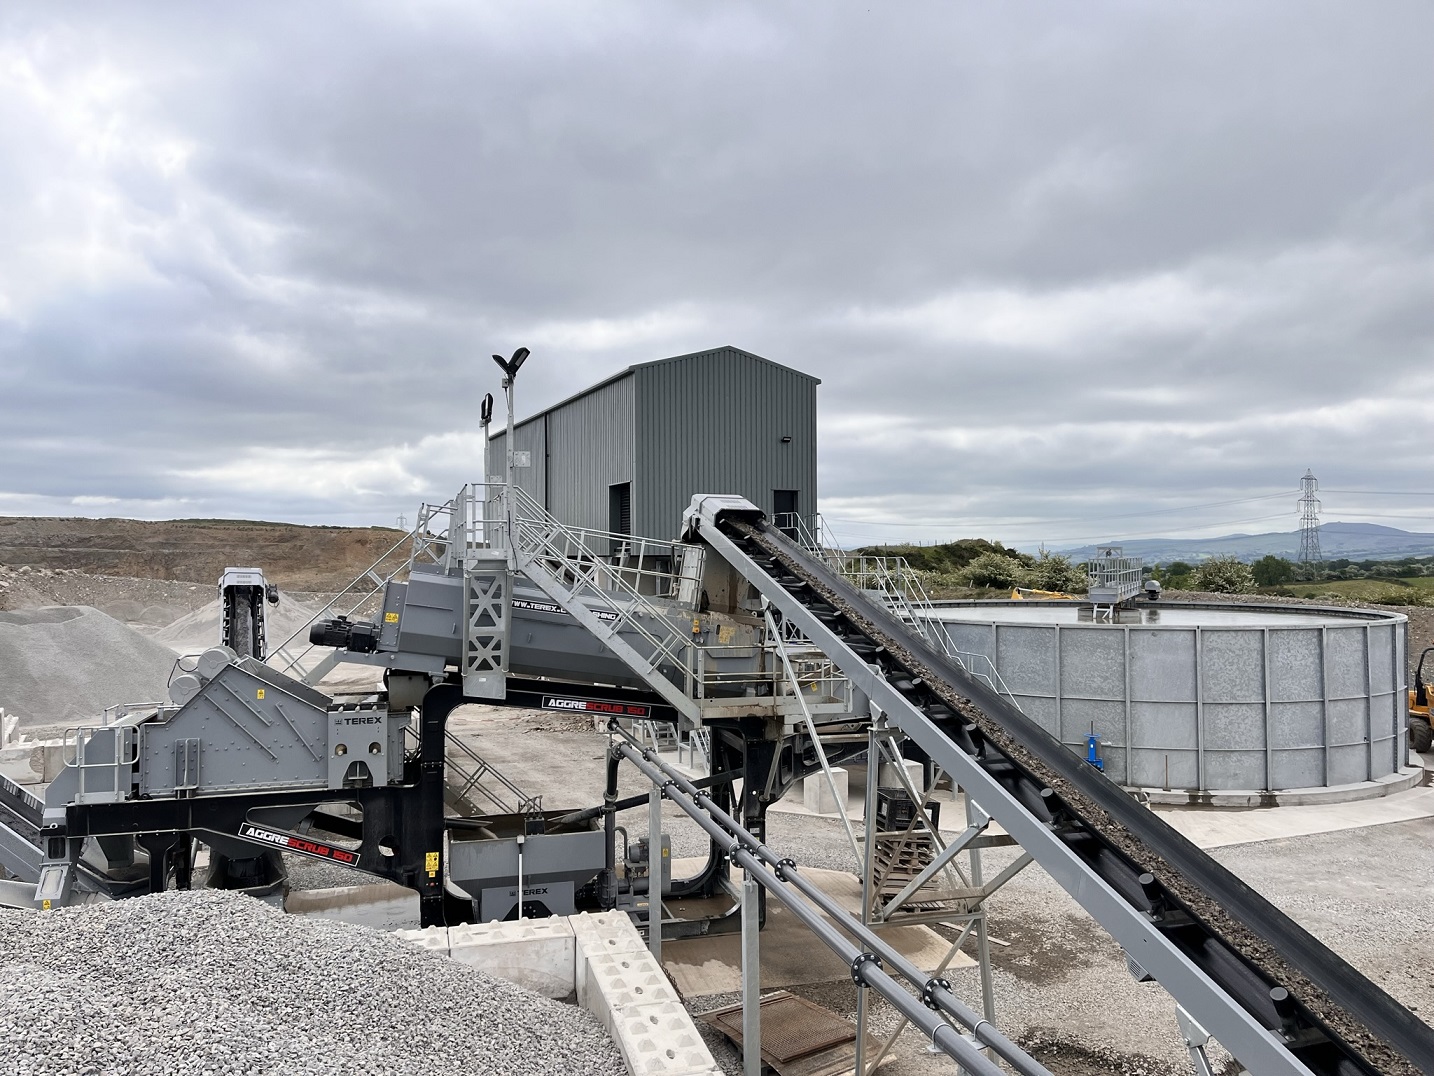 Aberdo limestone quarry has deployed a Terex Washing Systems FP215 filterpress, which features 1.5m x 2m filter plates, and an automated control system 